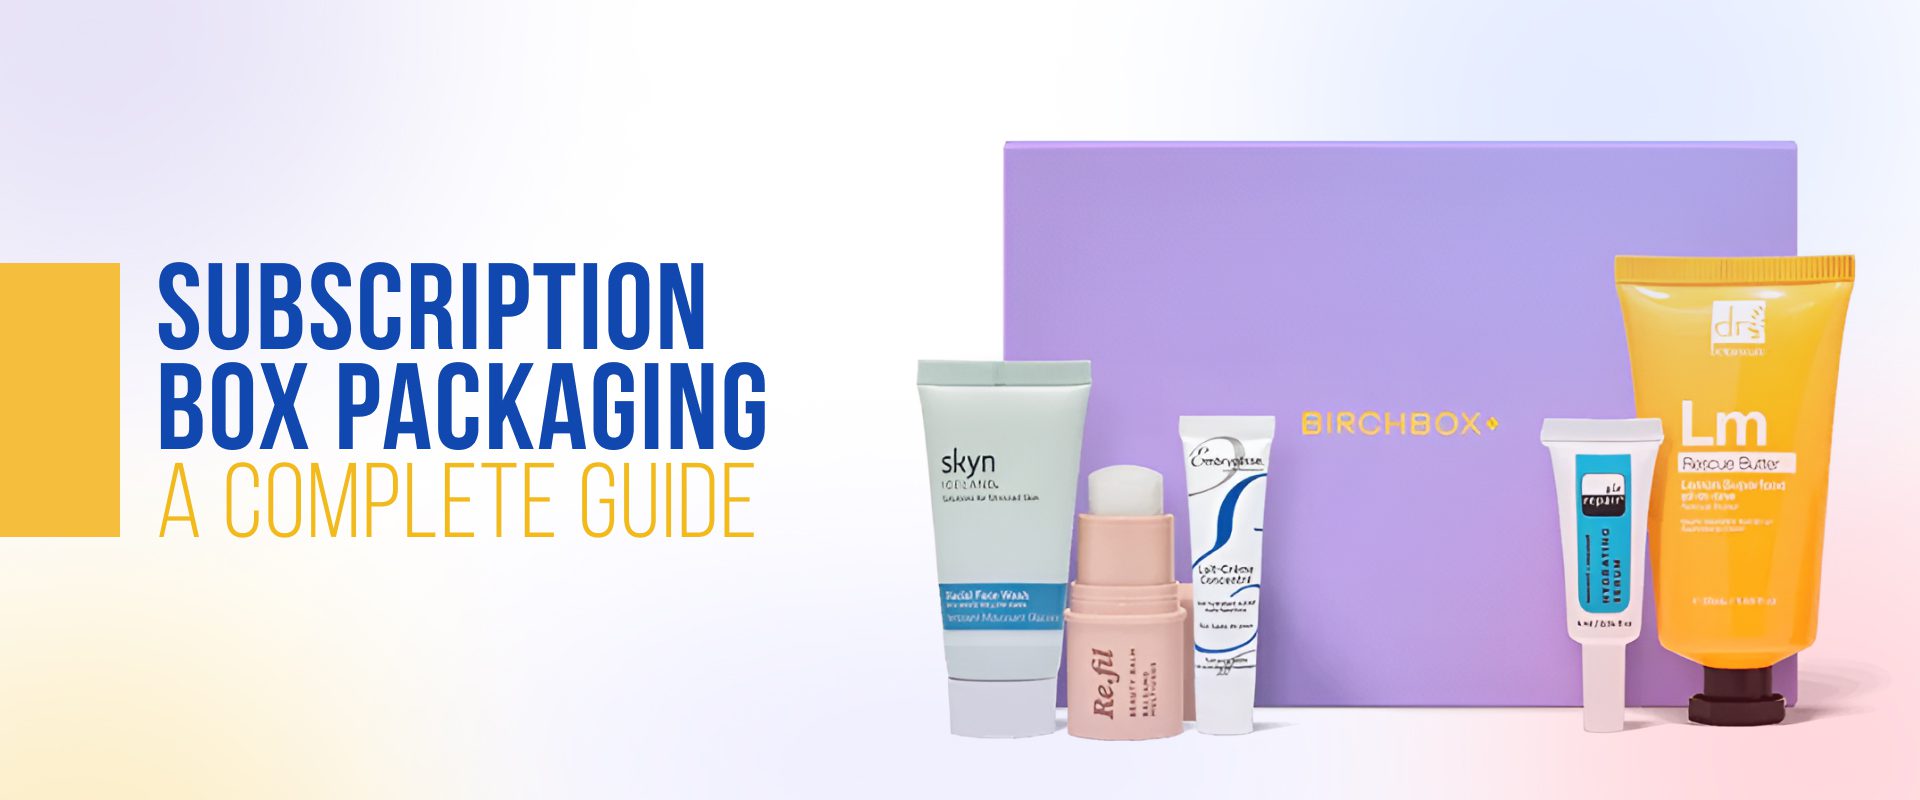 Subscription Box Packaging: A Complete Guide